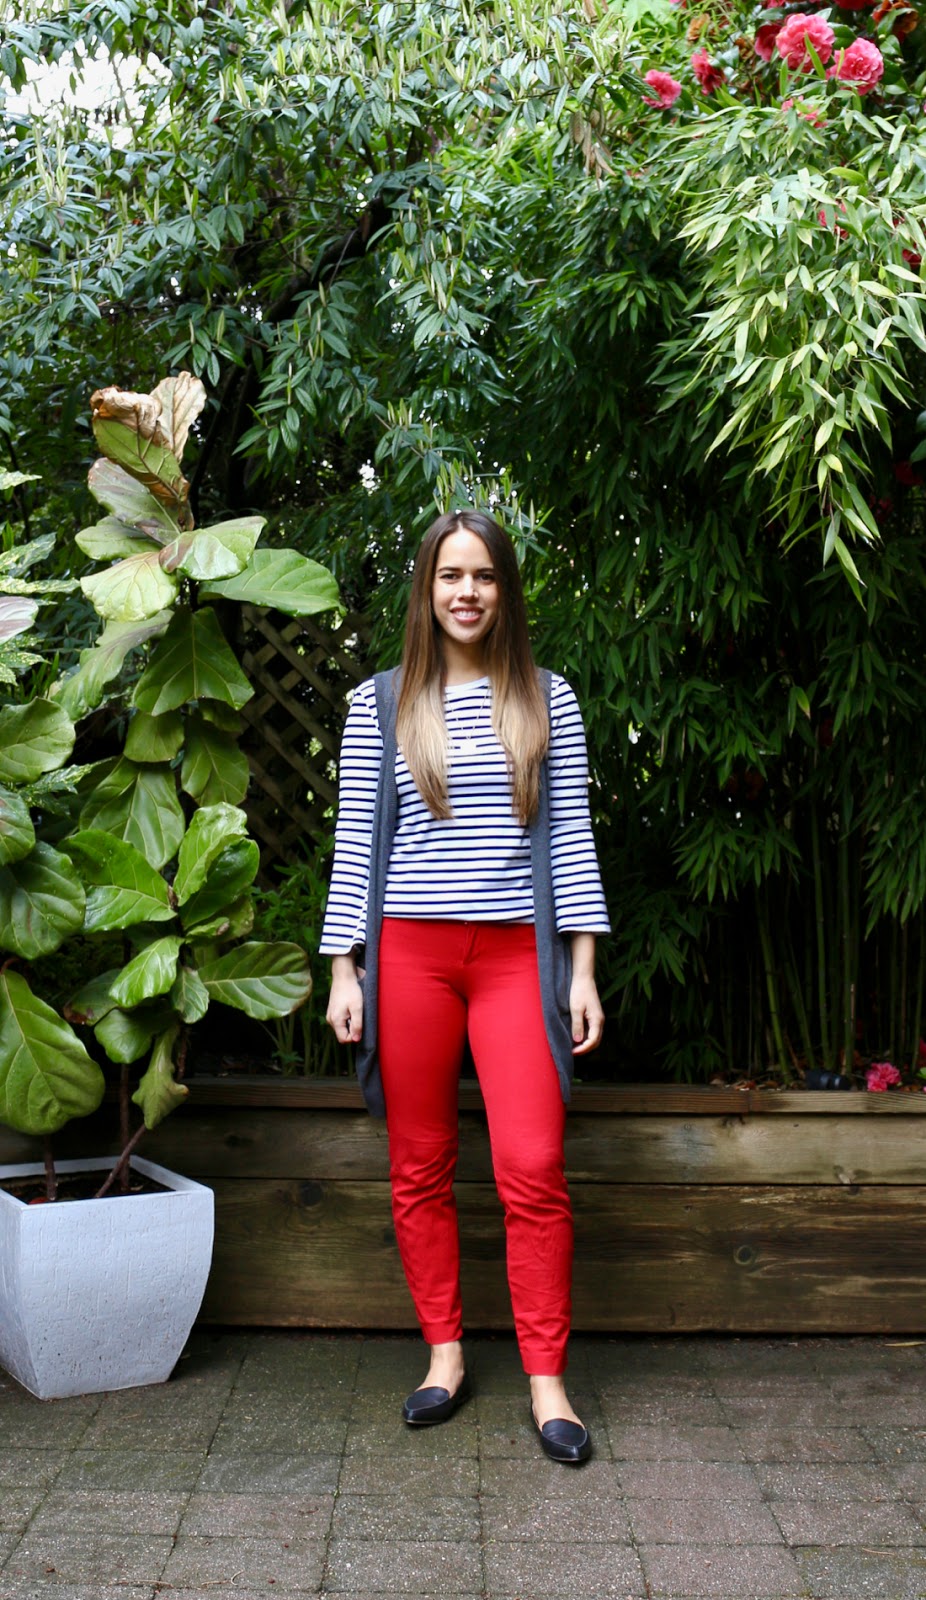 Jules in Flats - Stripe Bell Sleeve Top with Red Pants and Knit Vest (Business Casual Spring Workwear on a Budget)